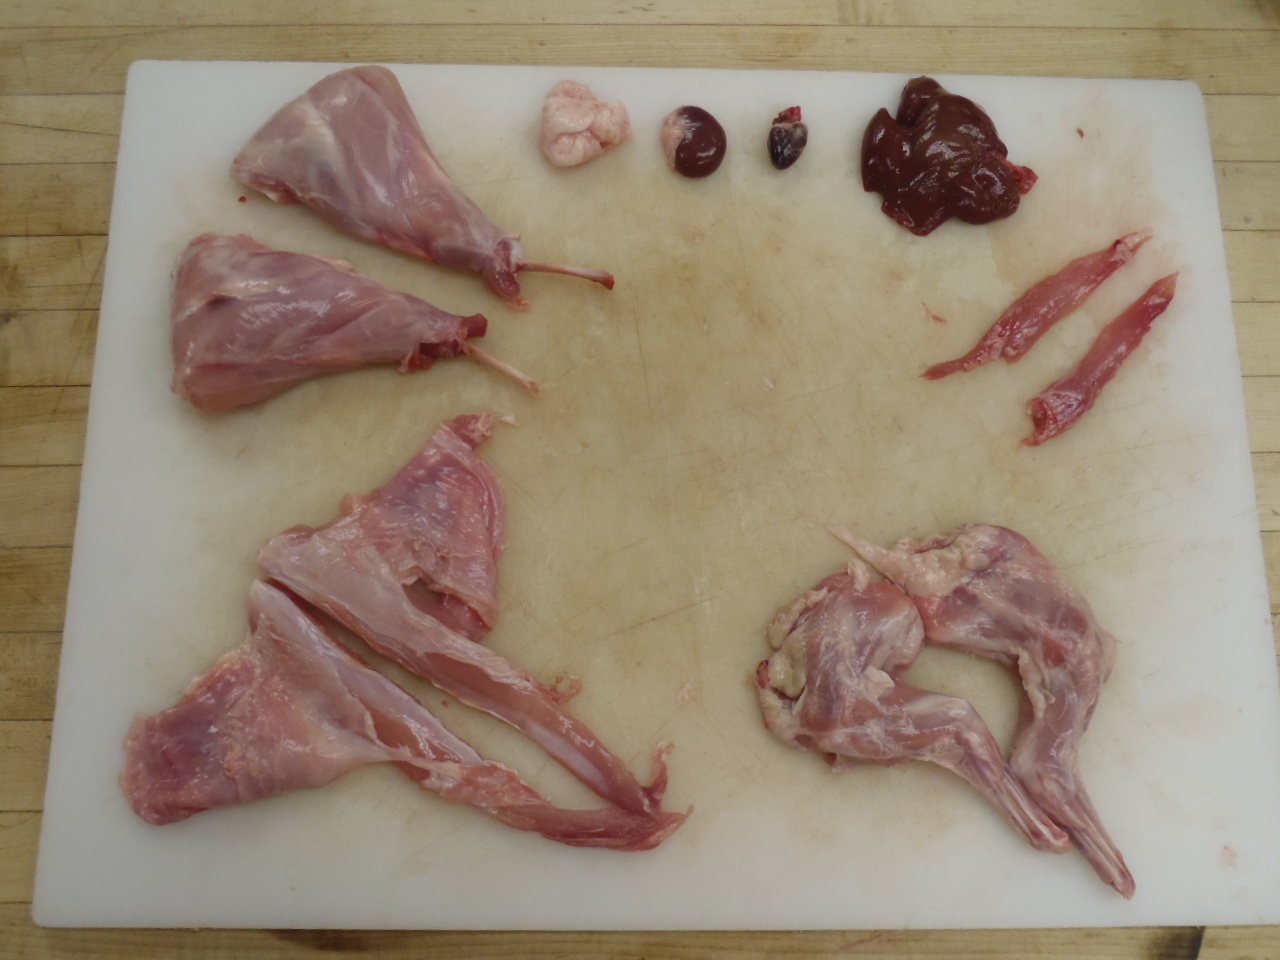 A fully separated rabbit carcass